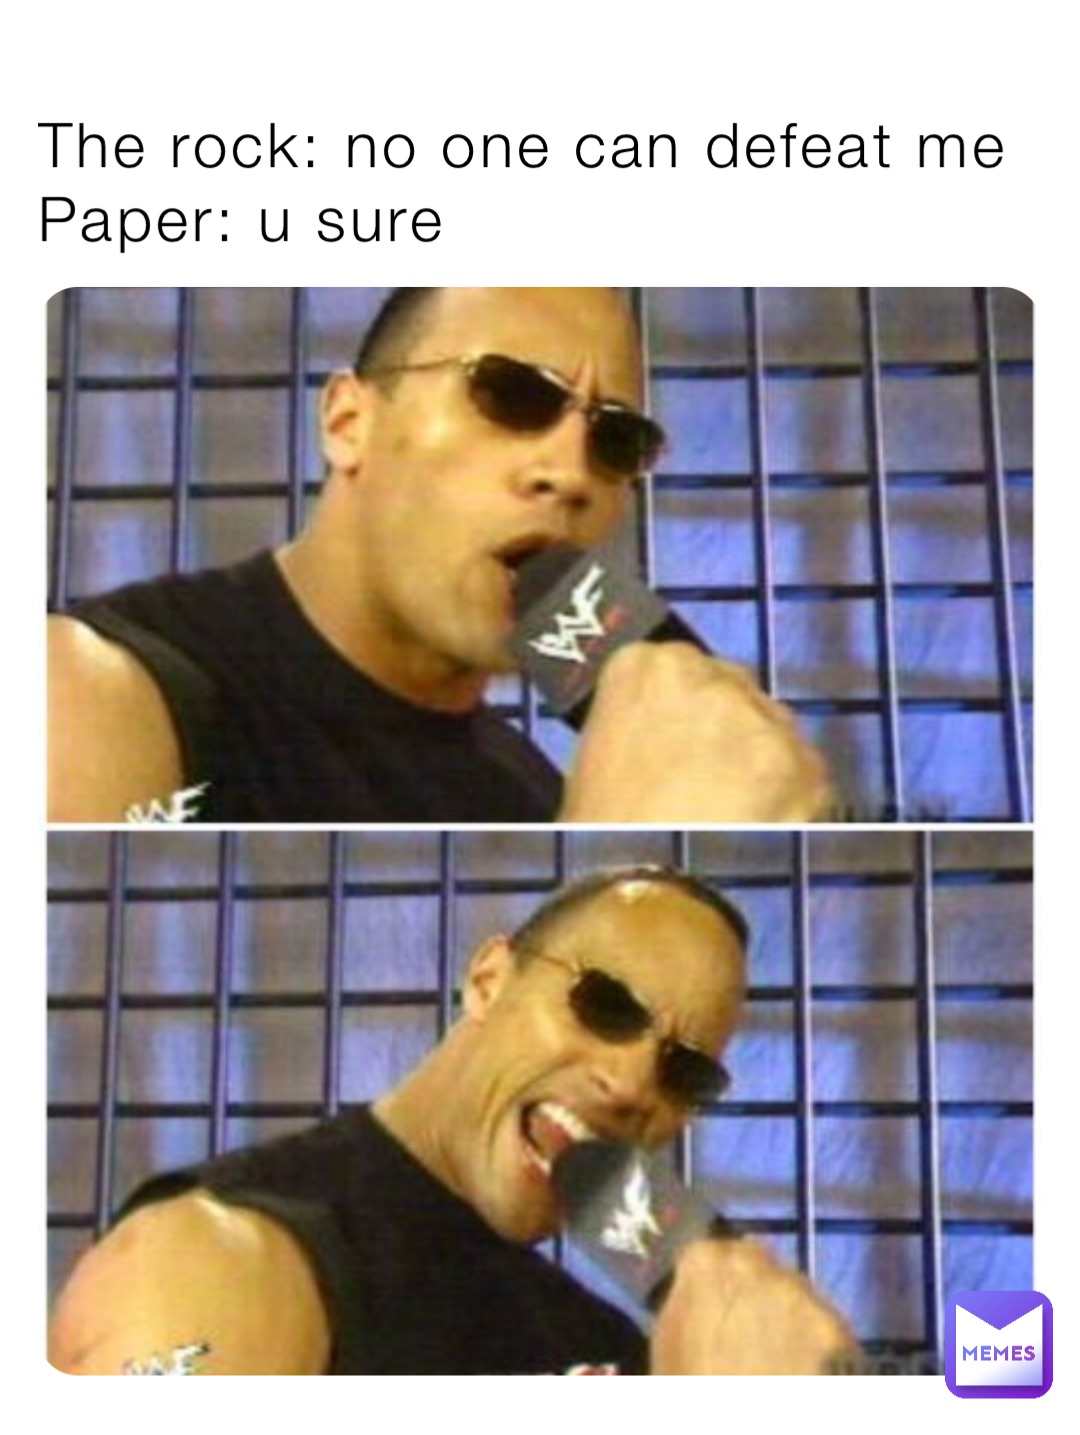 The rock: no one can defeat me
Paper: u sure